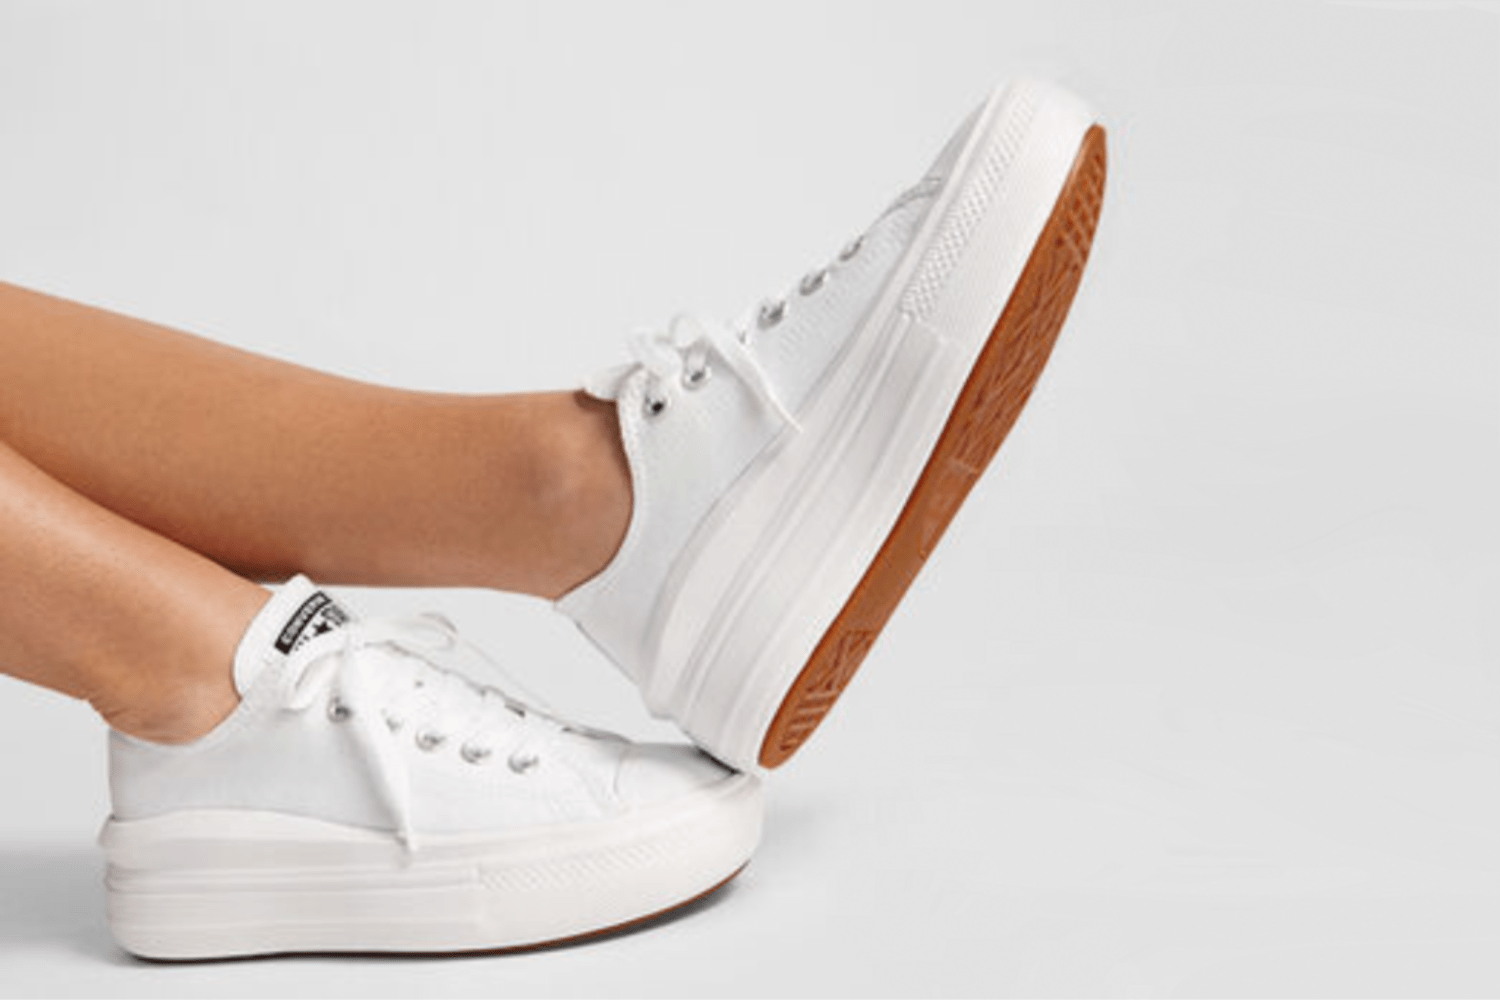 Converse platform sneakers for the summer